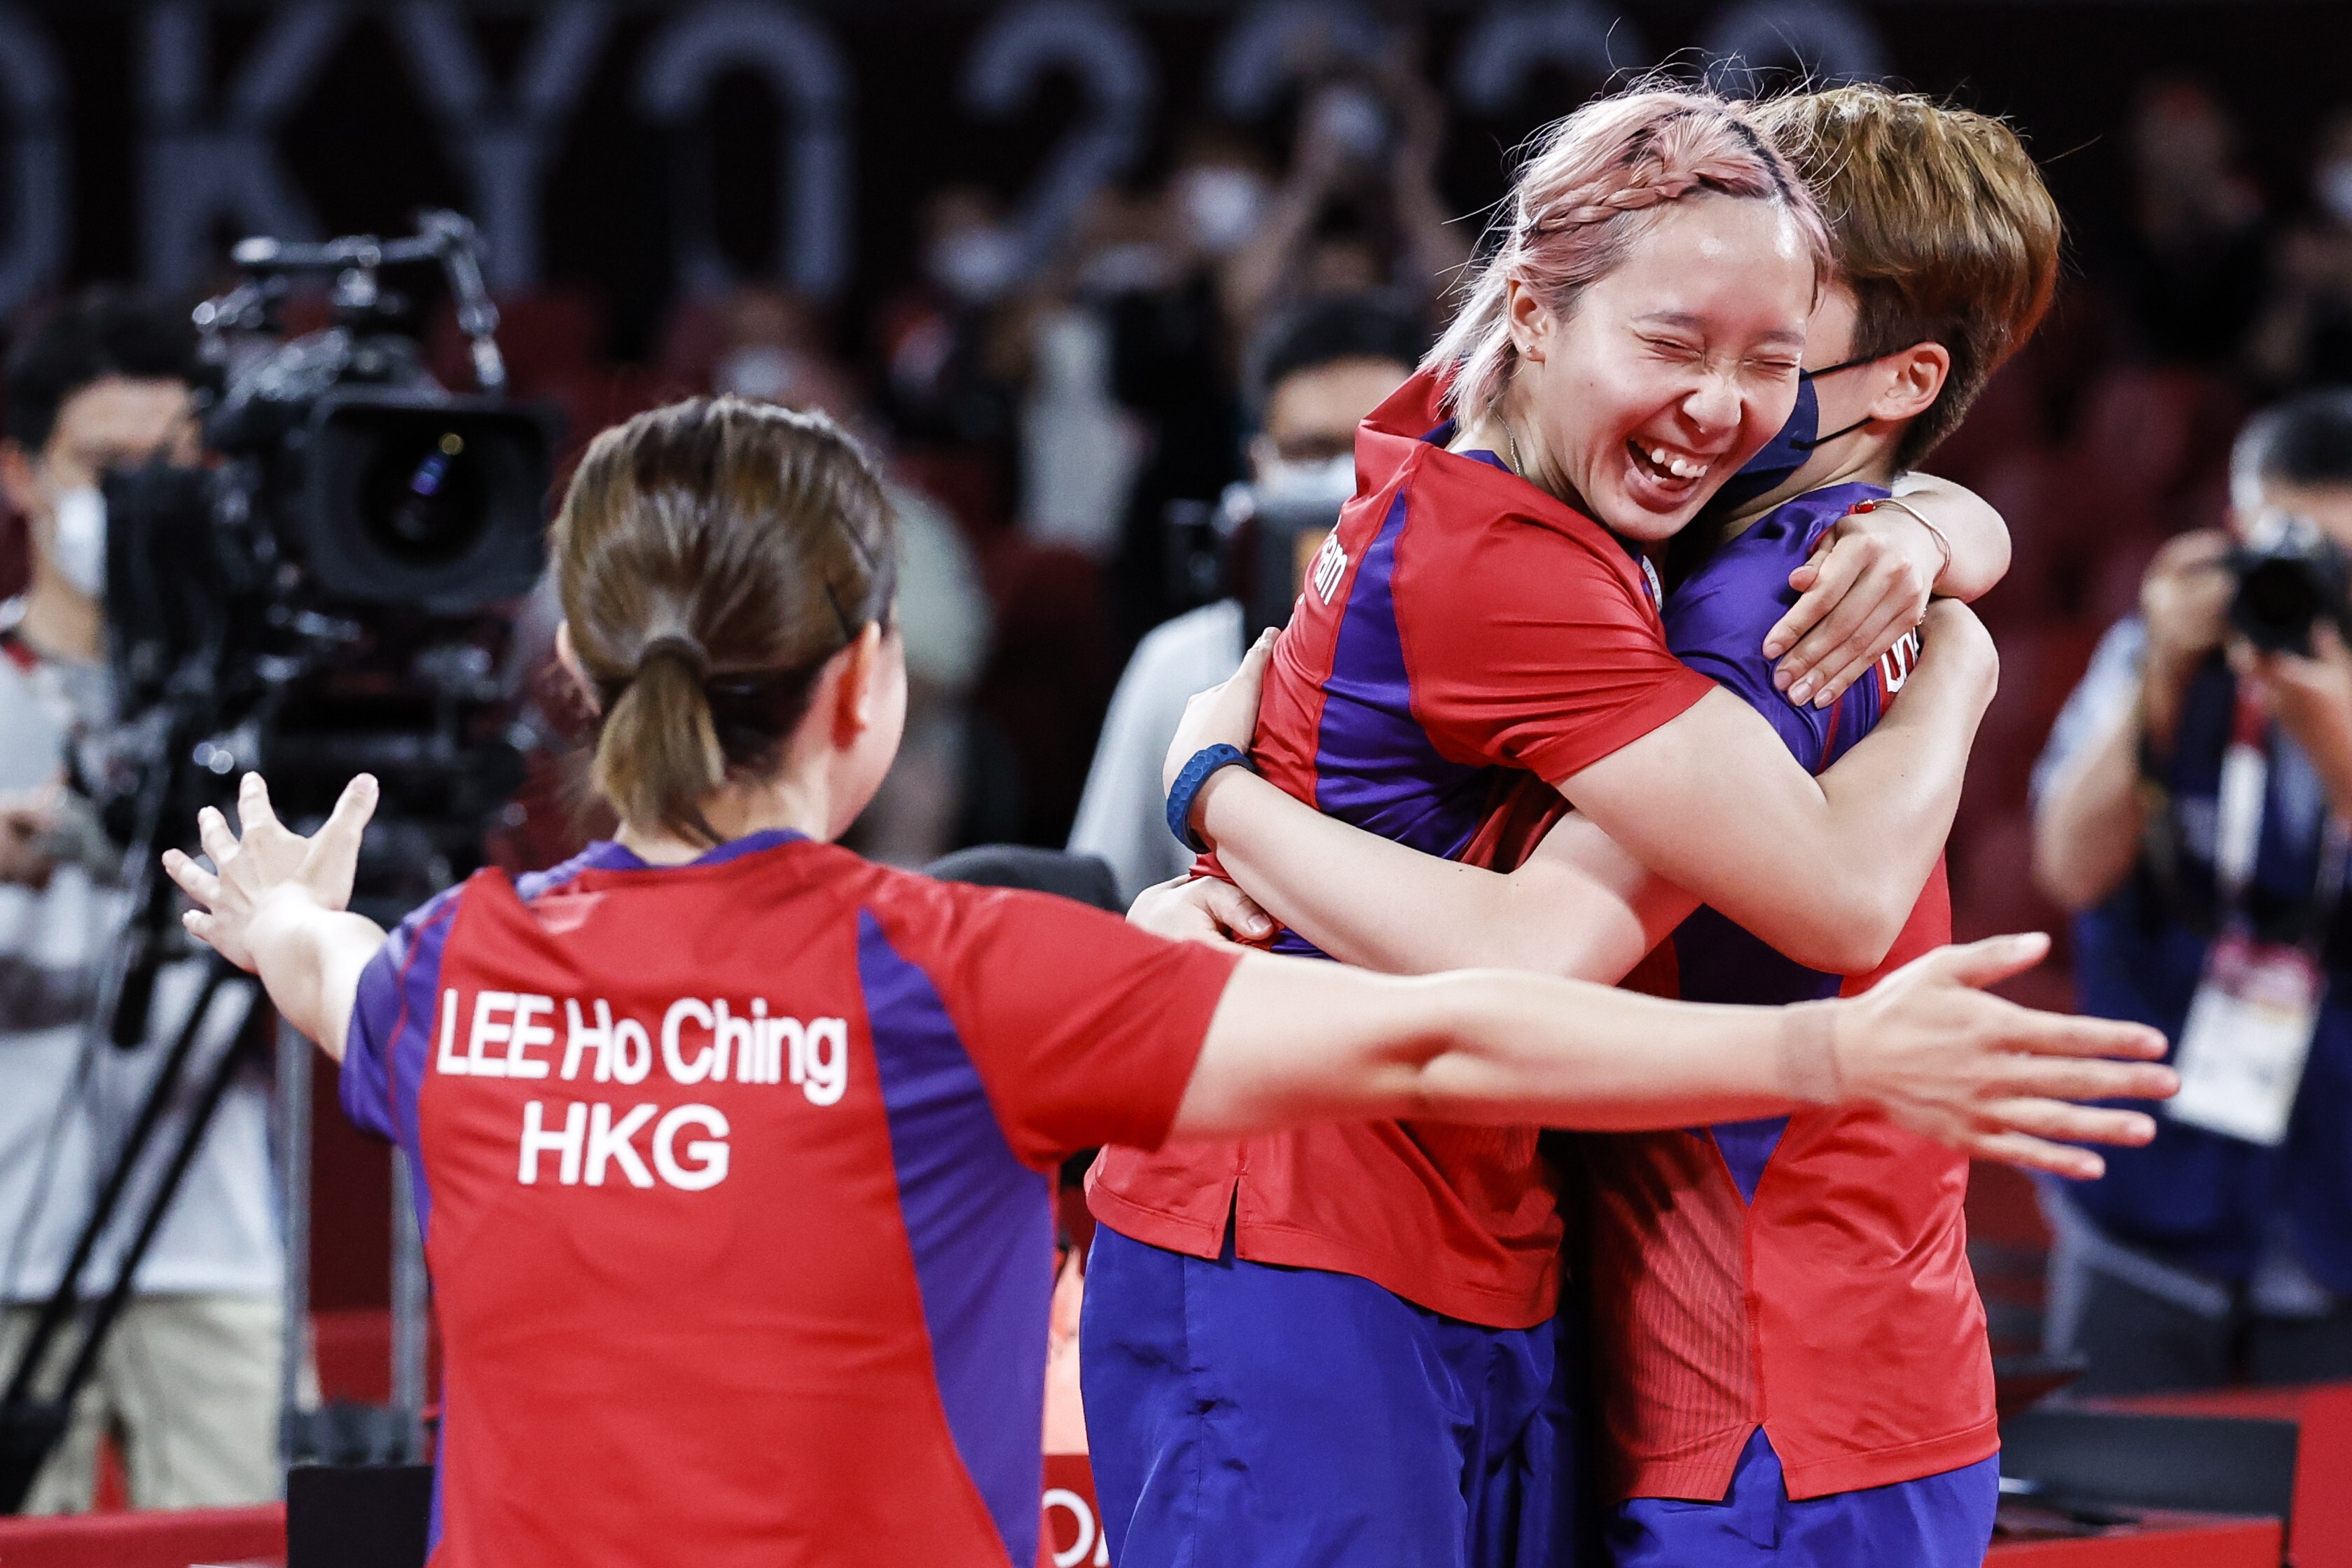 Hong Kong’s Lee Ho-ching, Minnie Soo Wai-yam and Doo Hoi-kem celebrate after winning the table tennis women's team bronze medal match against Germany at the Tokyo Olympics. Photo: EPA-EFE